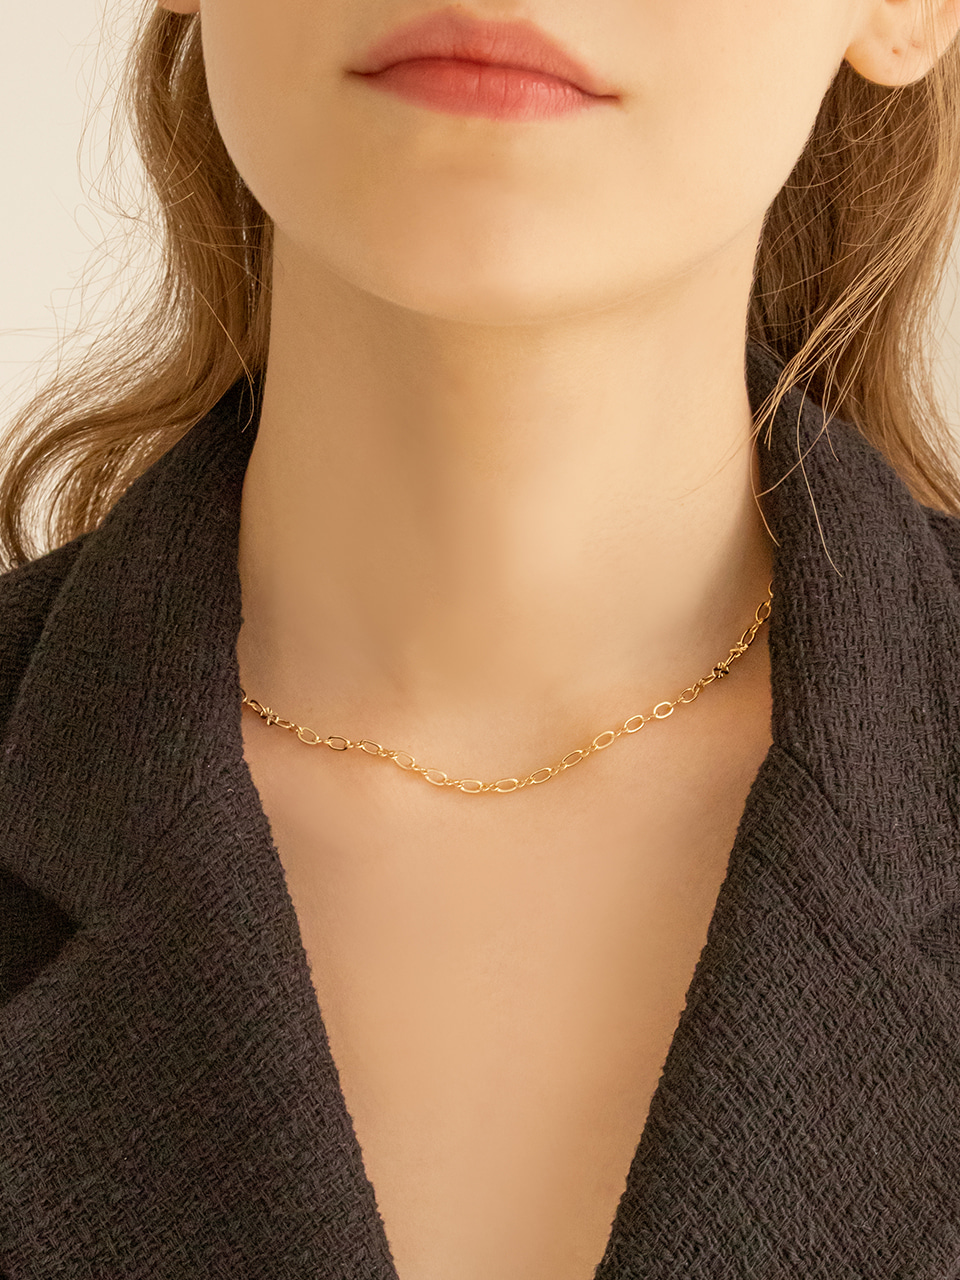 belle chain necklace